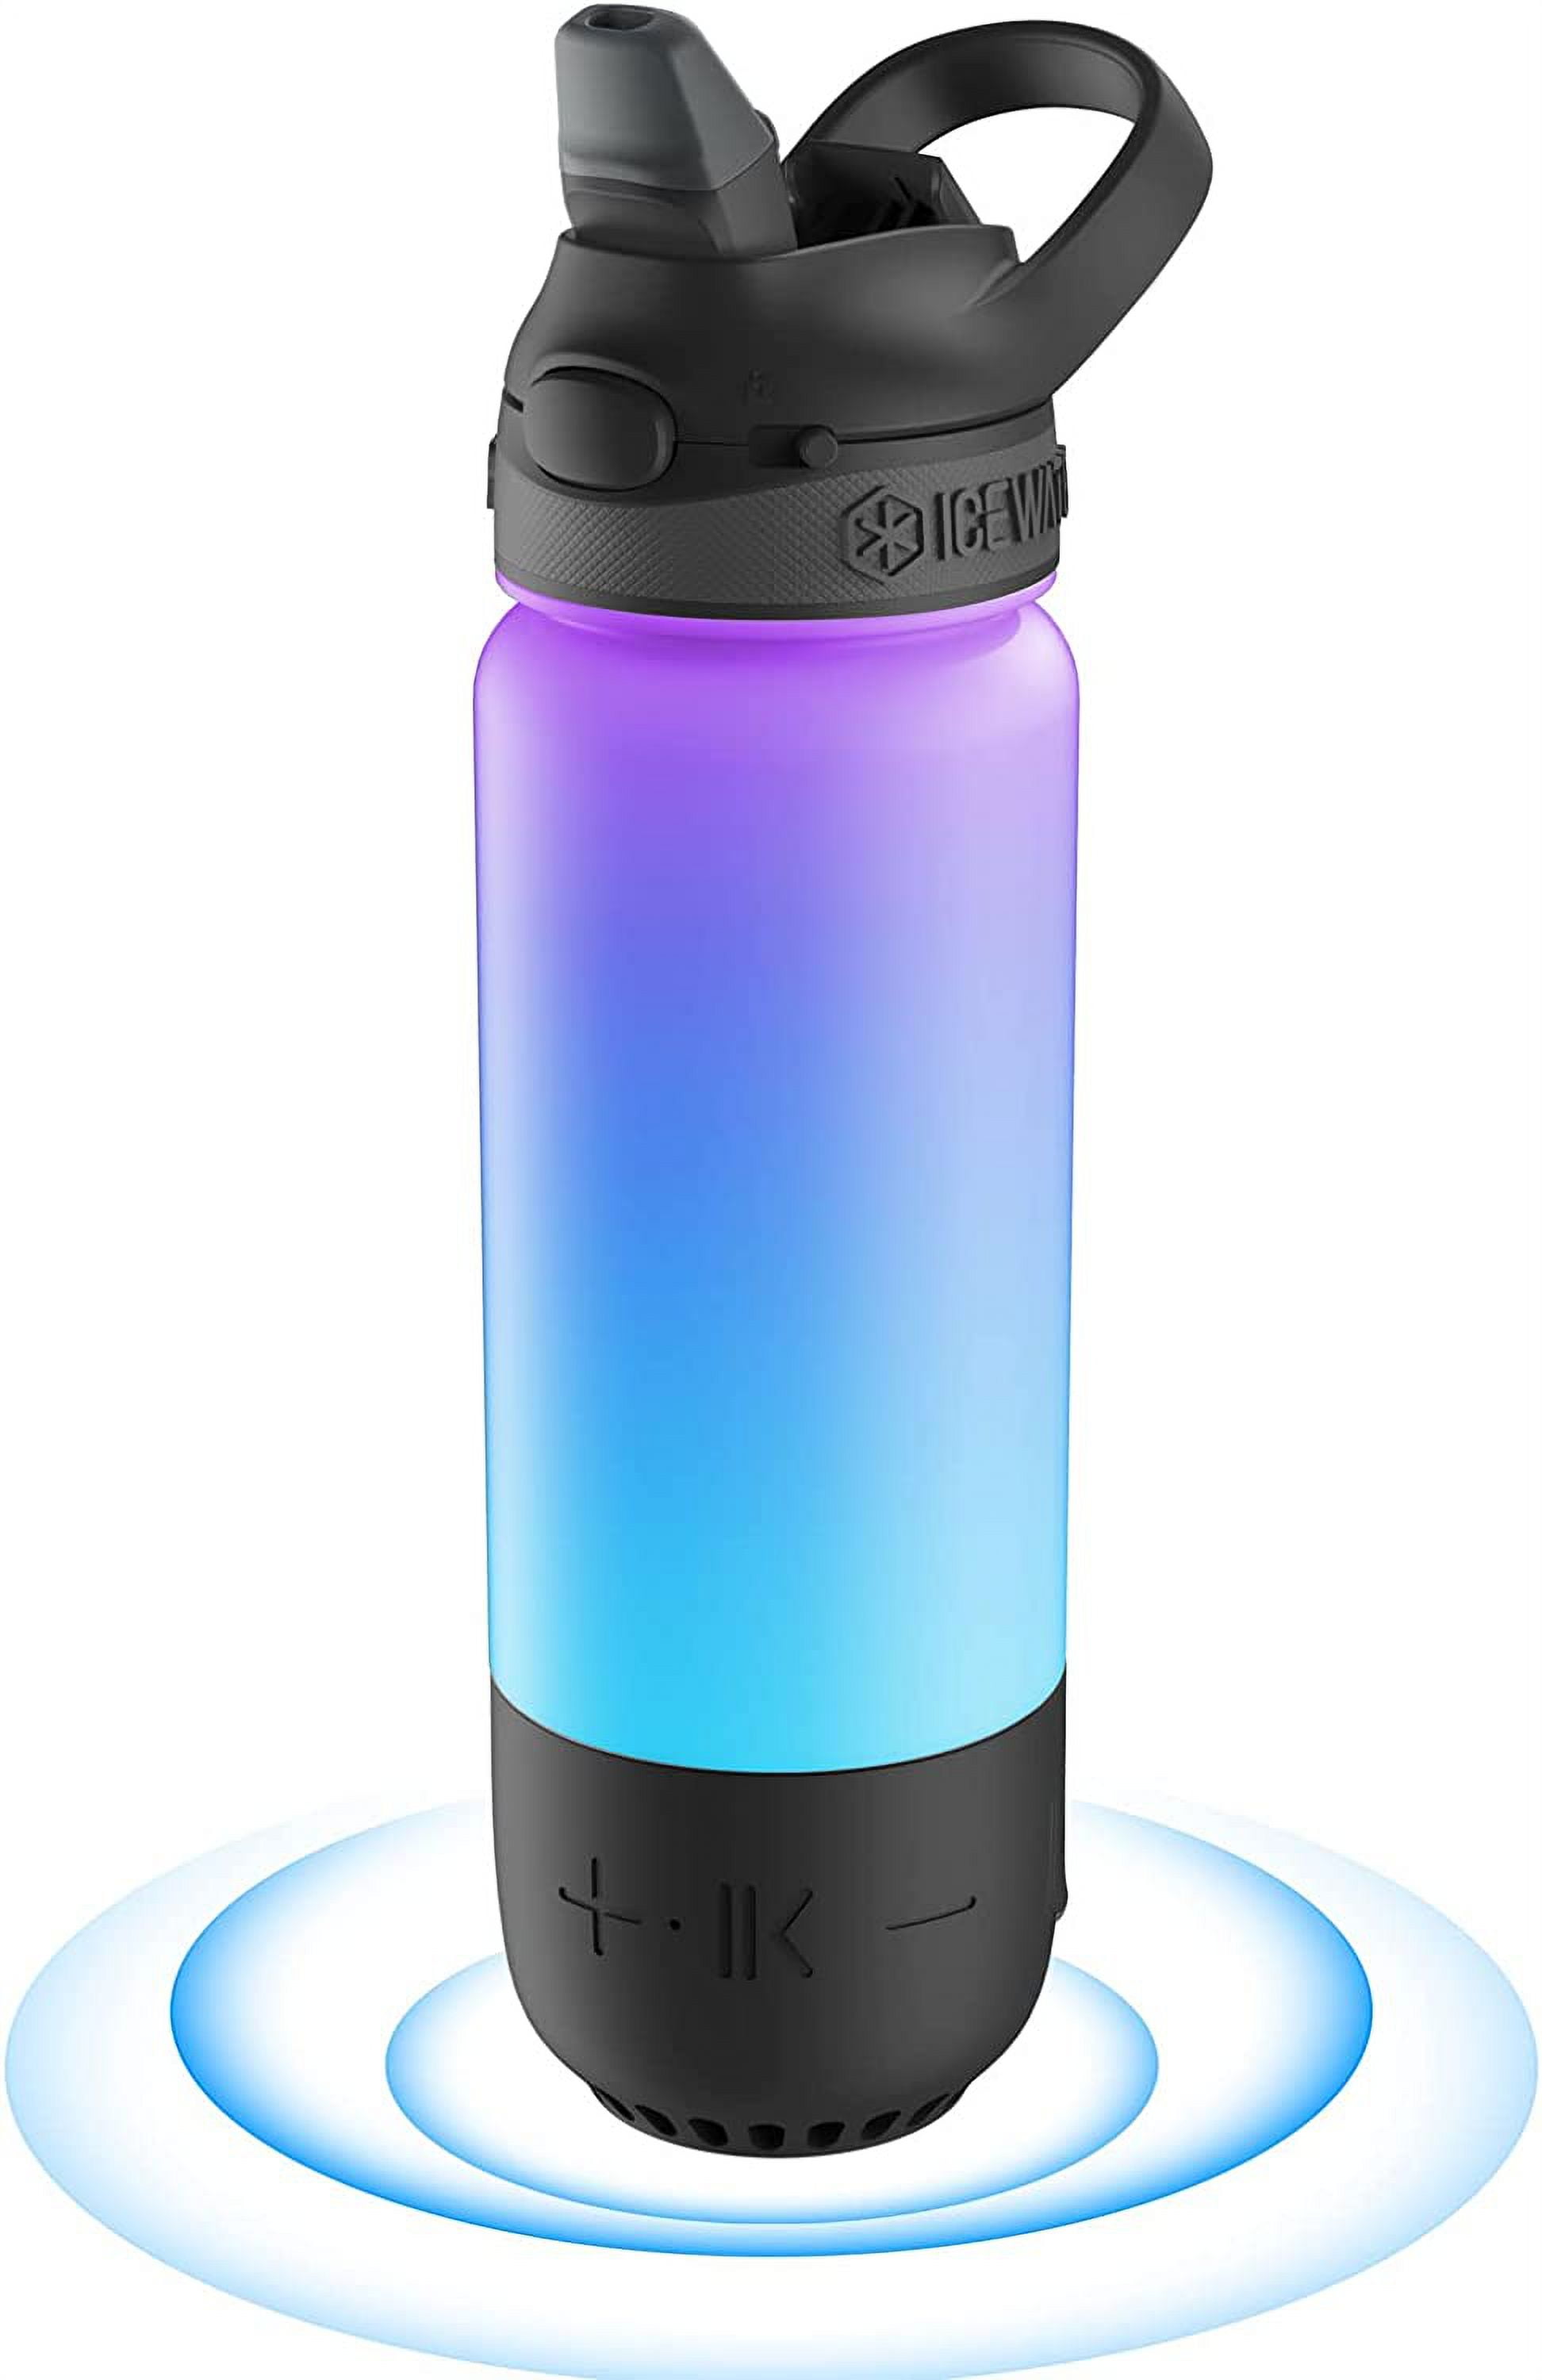  ICEWATER 3-in-1 Smart Water Bottle, Great Christmas Gift, Glows  to Remind You to Keep Hydrated, Play Music & Dancing Lights, Vacuum  Insulated, Stainless Steel, 18 oz (Insulated-Straw Lid, Black) : Home